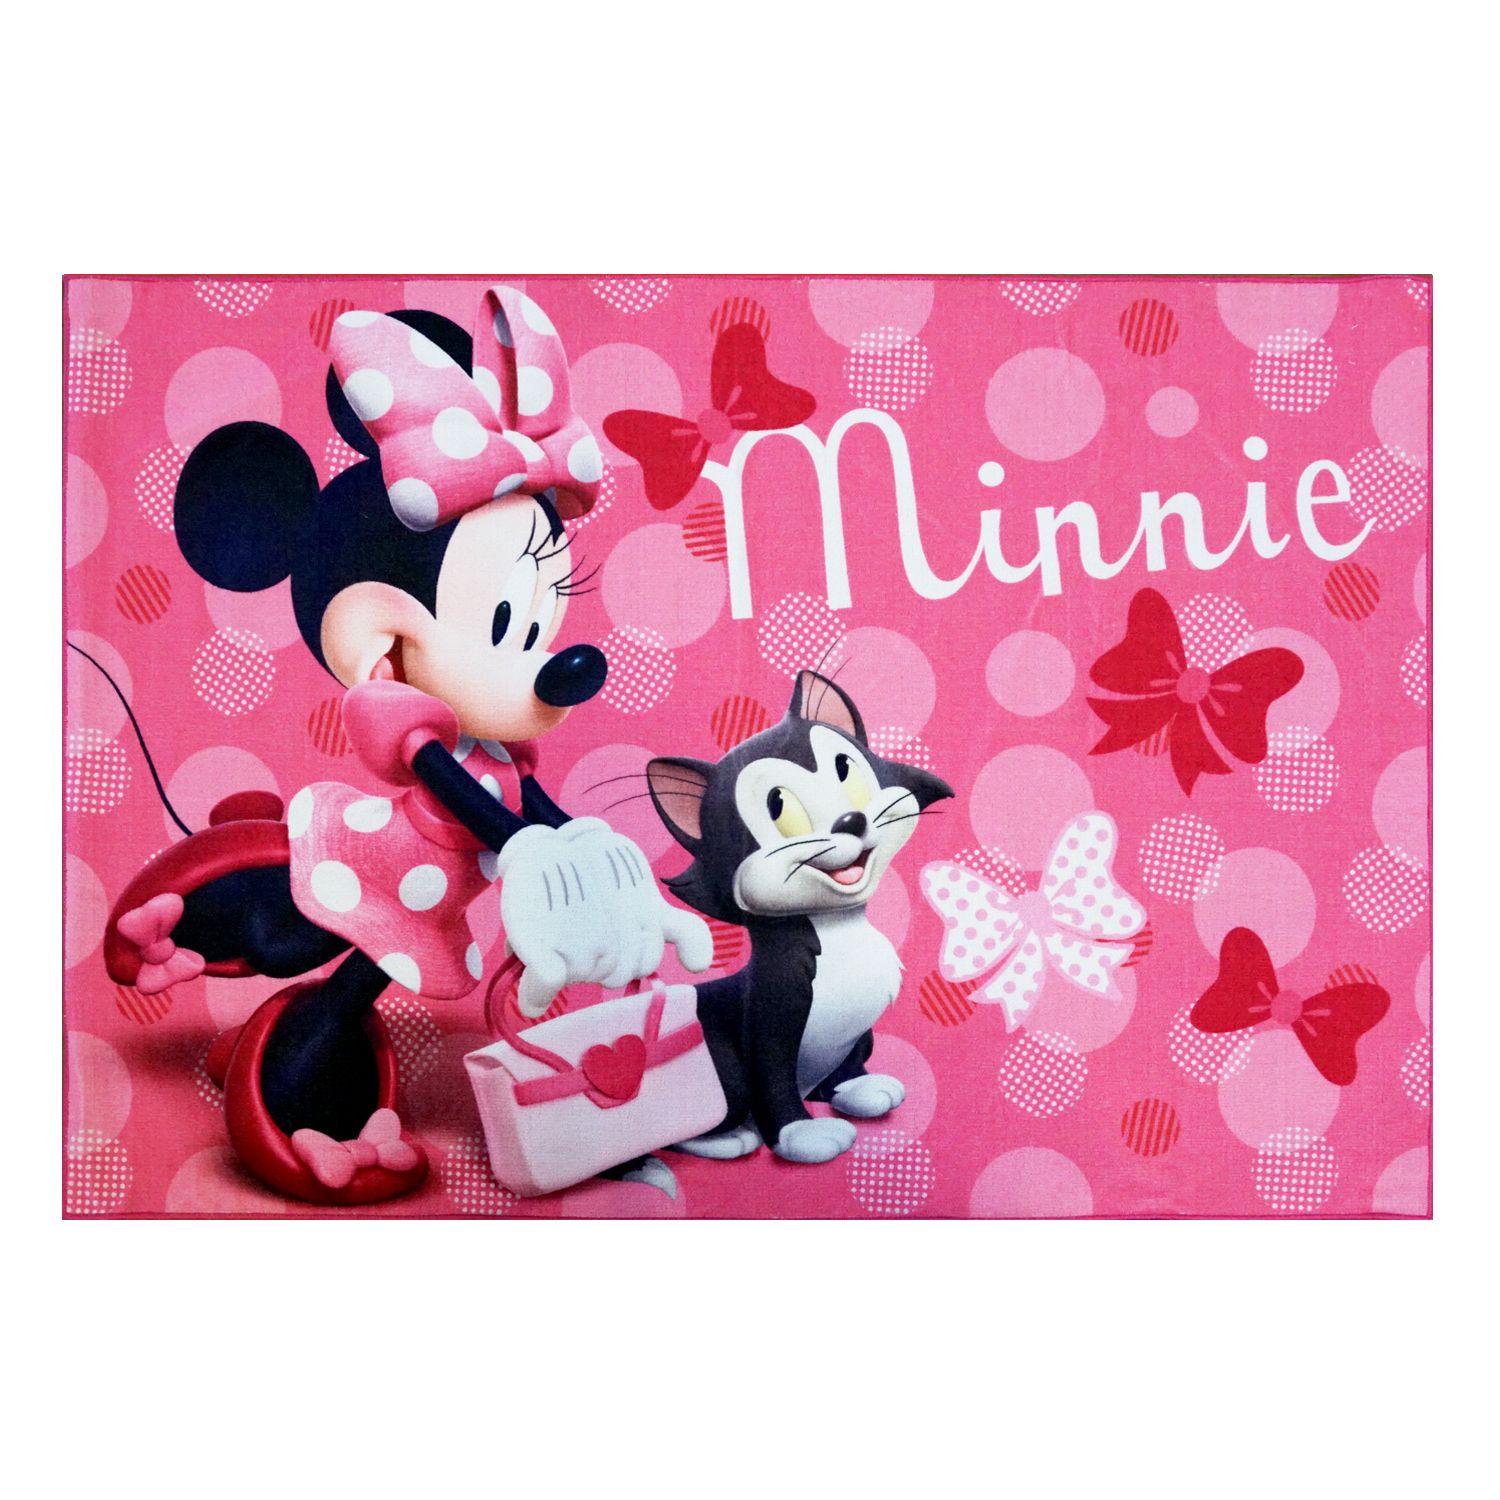 Image for Disney 's Minnie Mouse Rug - 4'6" x 6'6" at Kohl's.